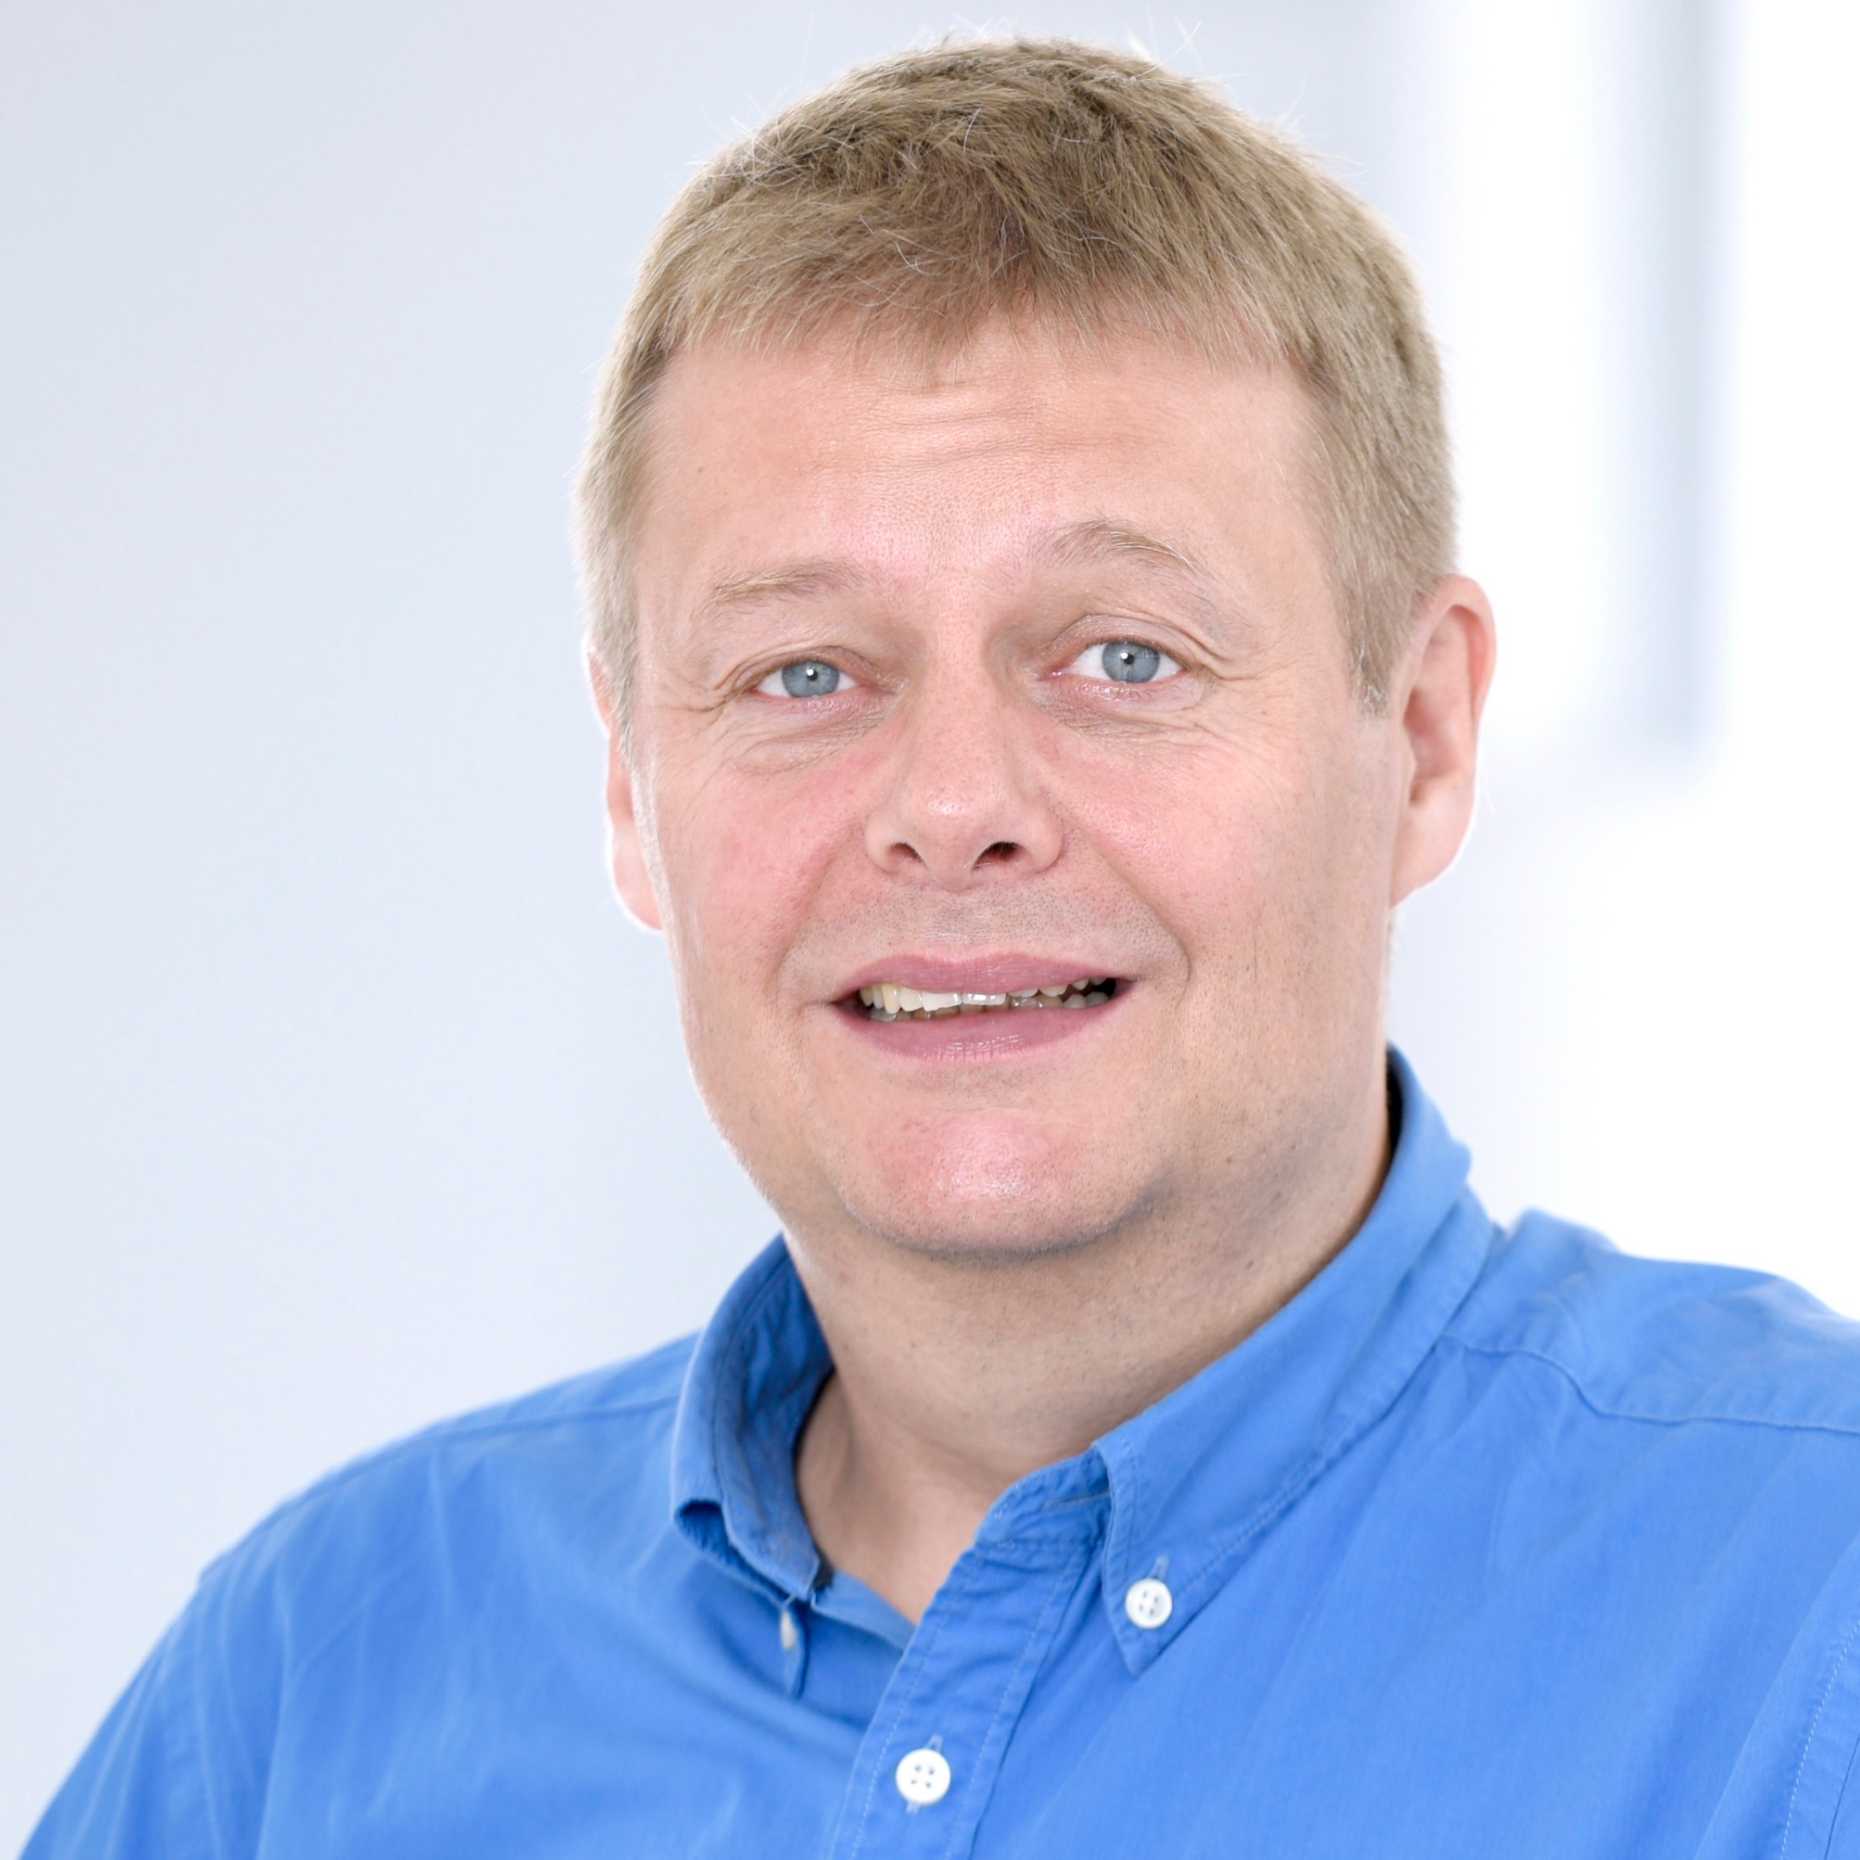 Sven Panke, Prof. of Bioprocesses and Head of the D-BSSE